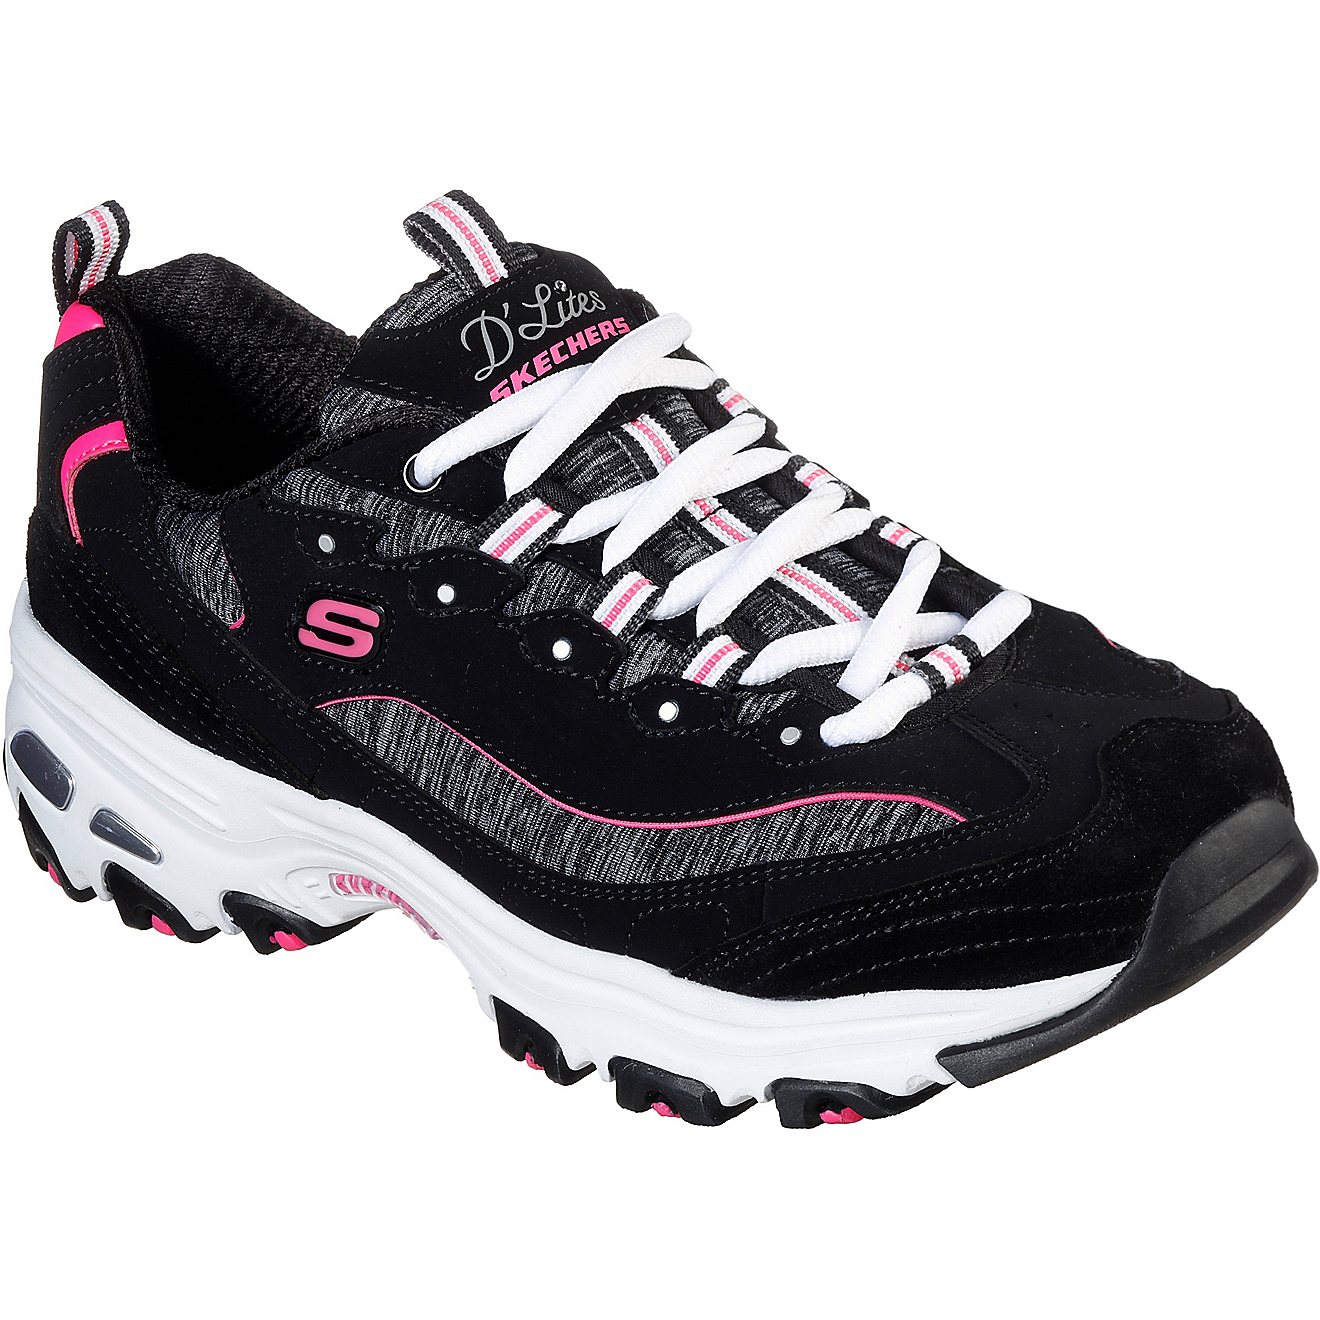 SKECHERS Women’s D’lites Me Time Shoes                                                                                       - view number 2